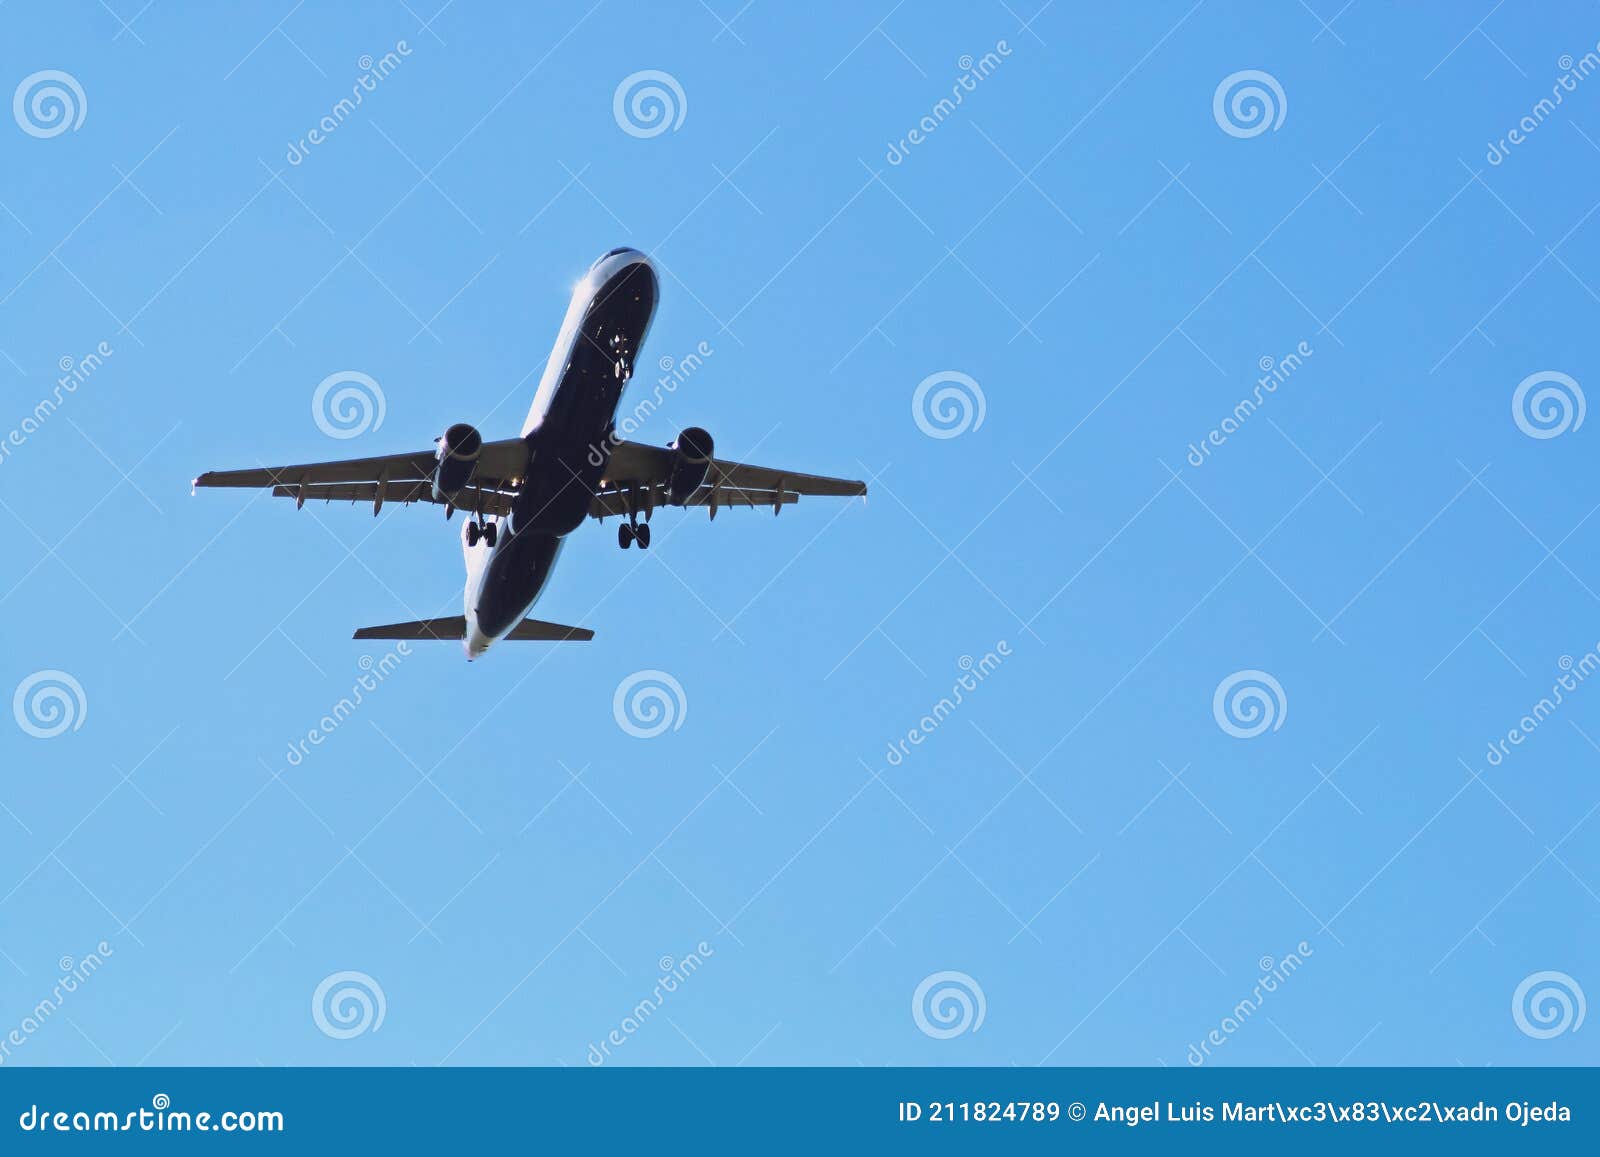 airbus plane seen from below during the landing maneuver.